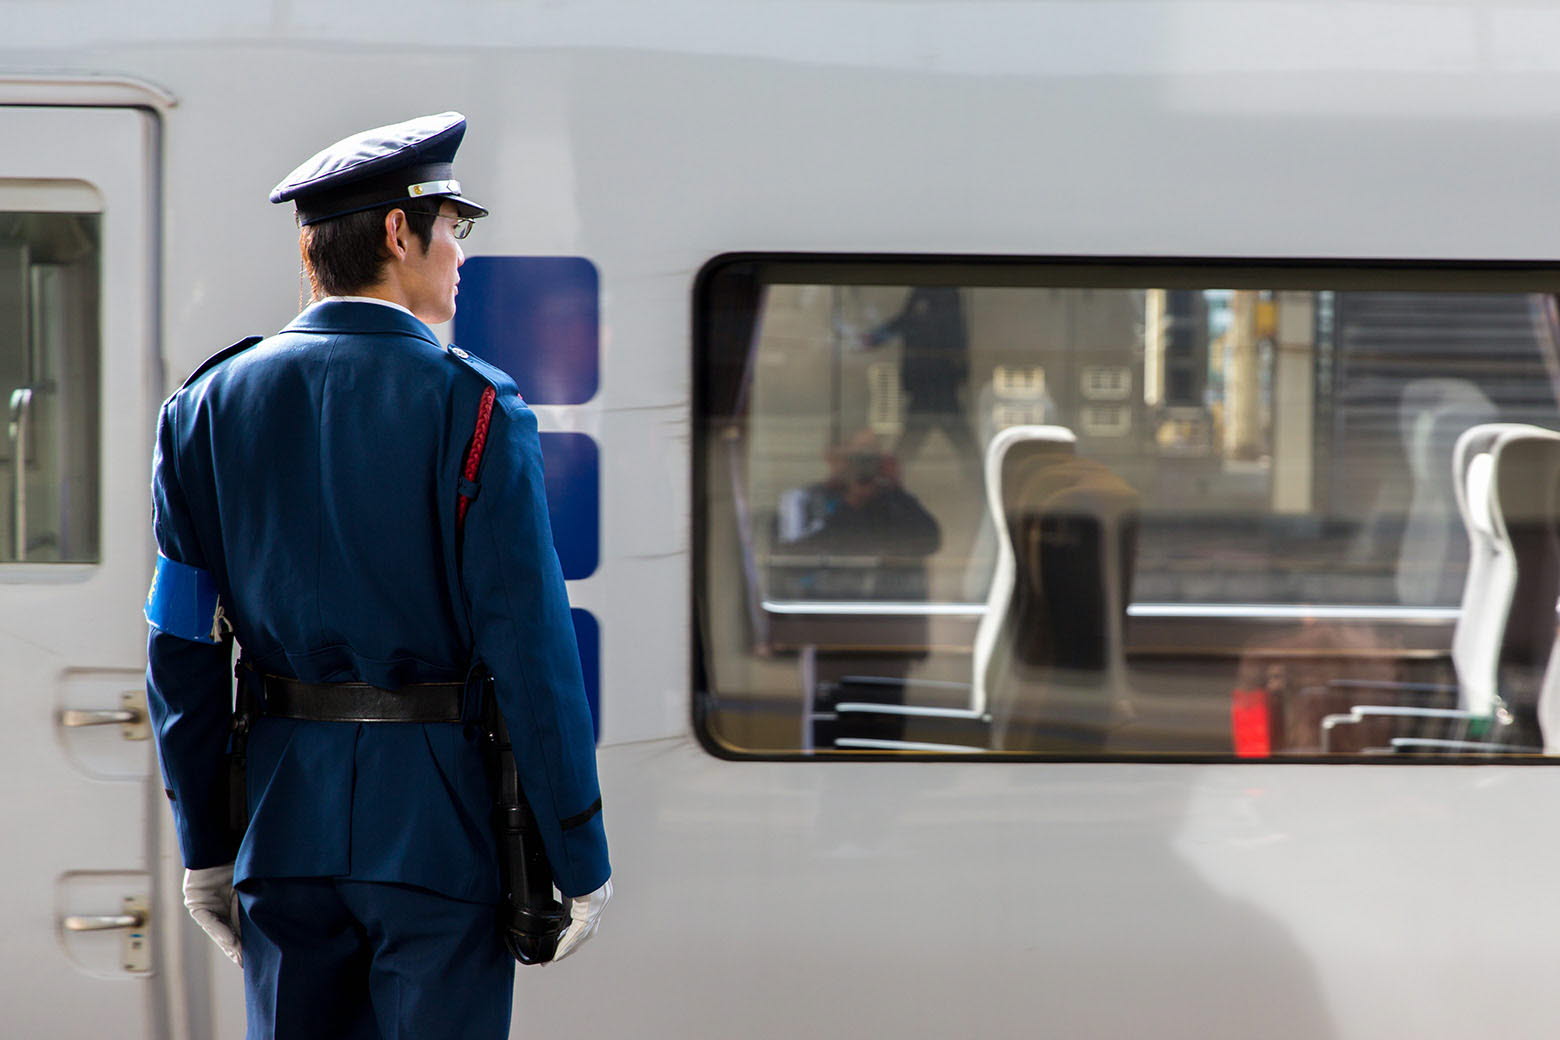 Train conductor in Japan